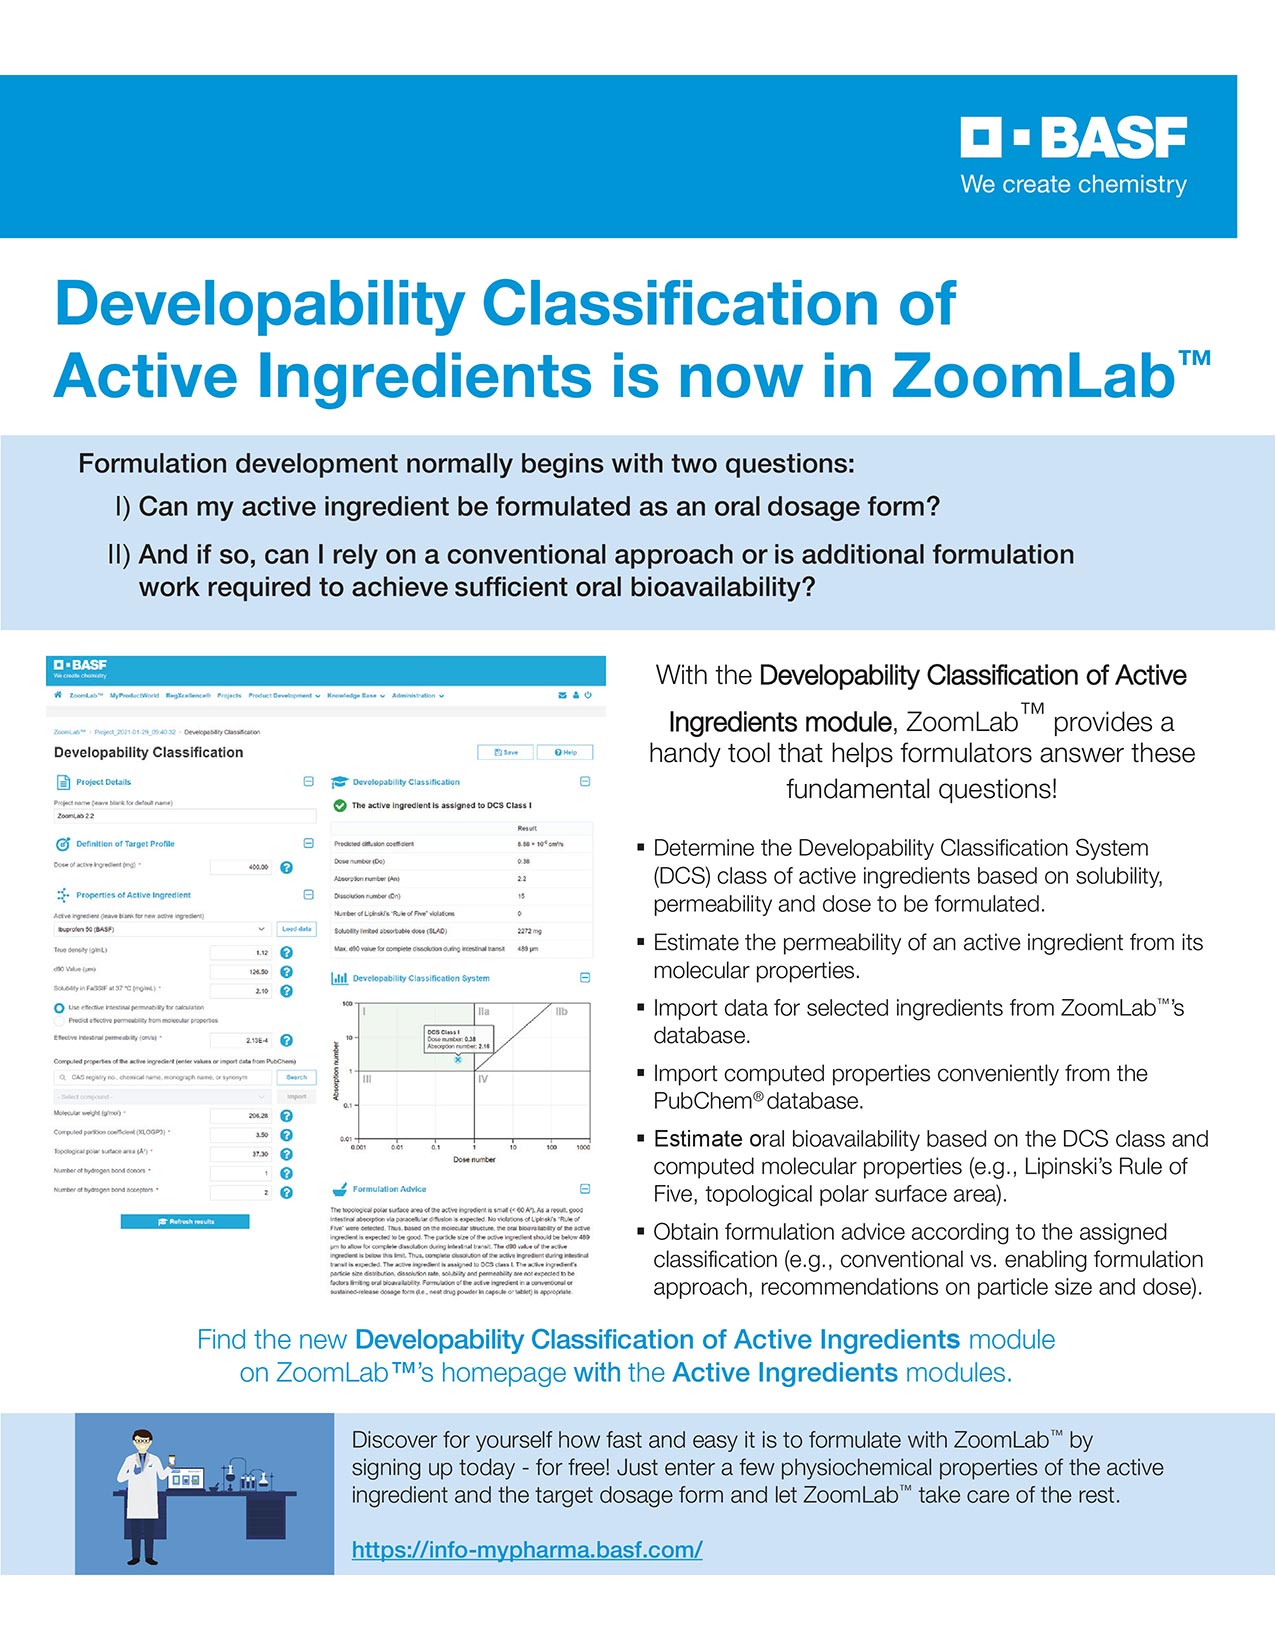 ZoomLab™ features now the Developability Classification of Active Ingredients - small